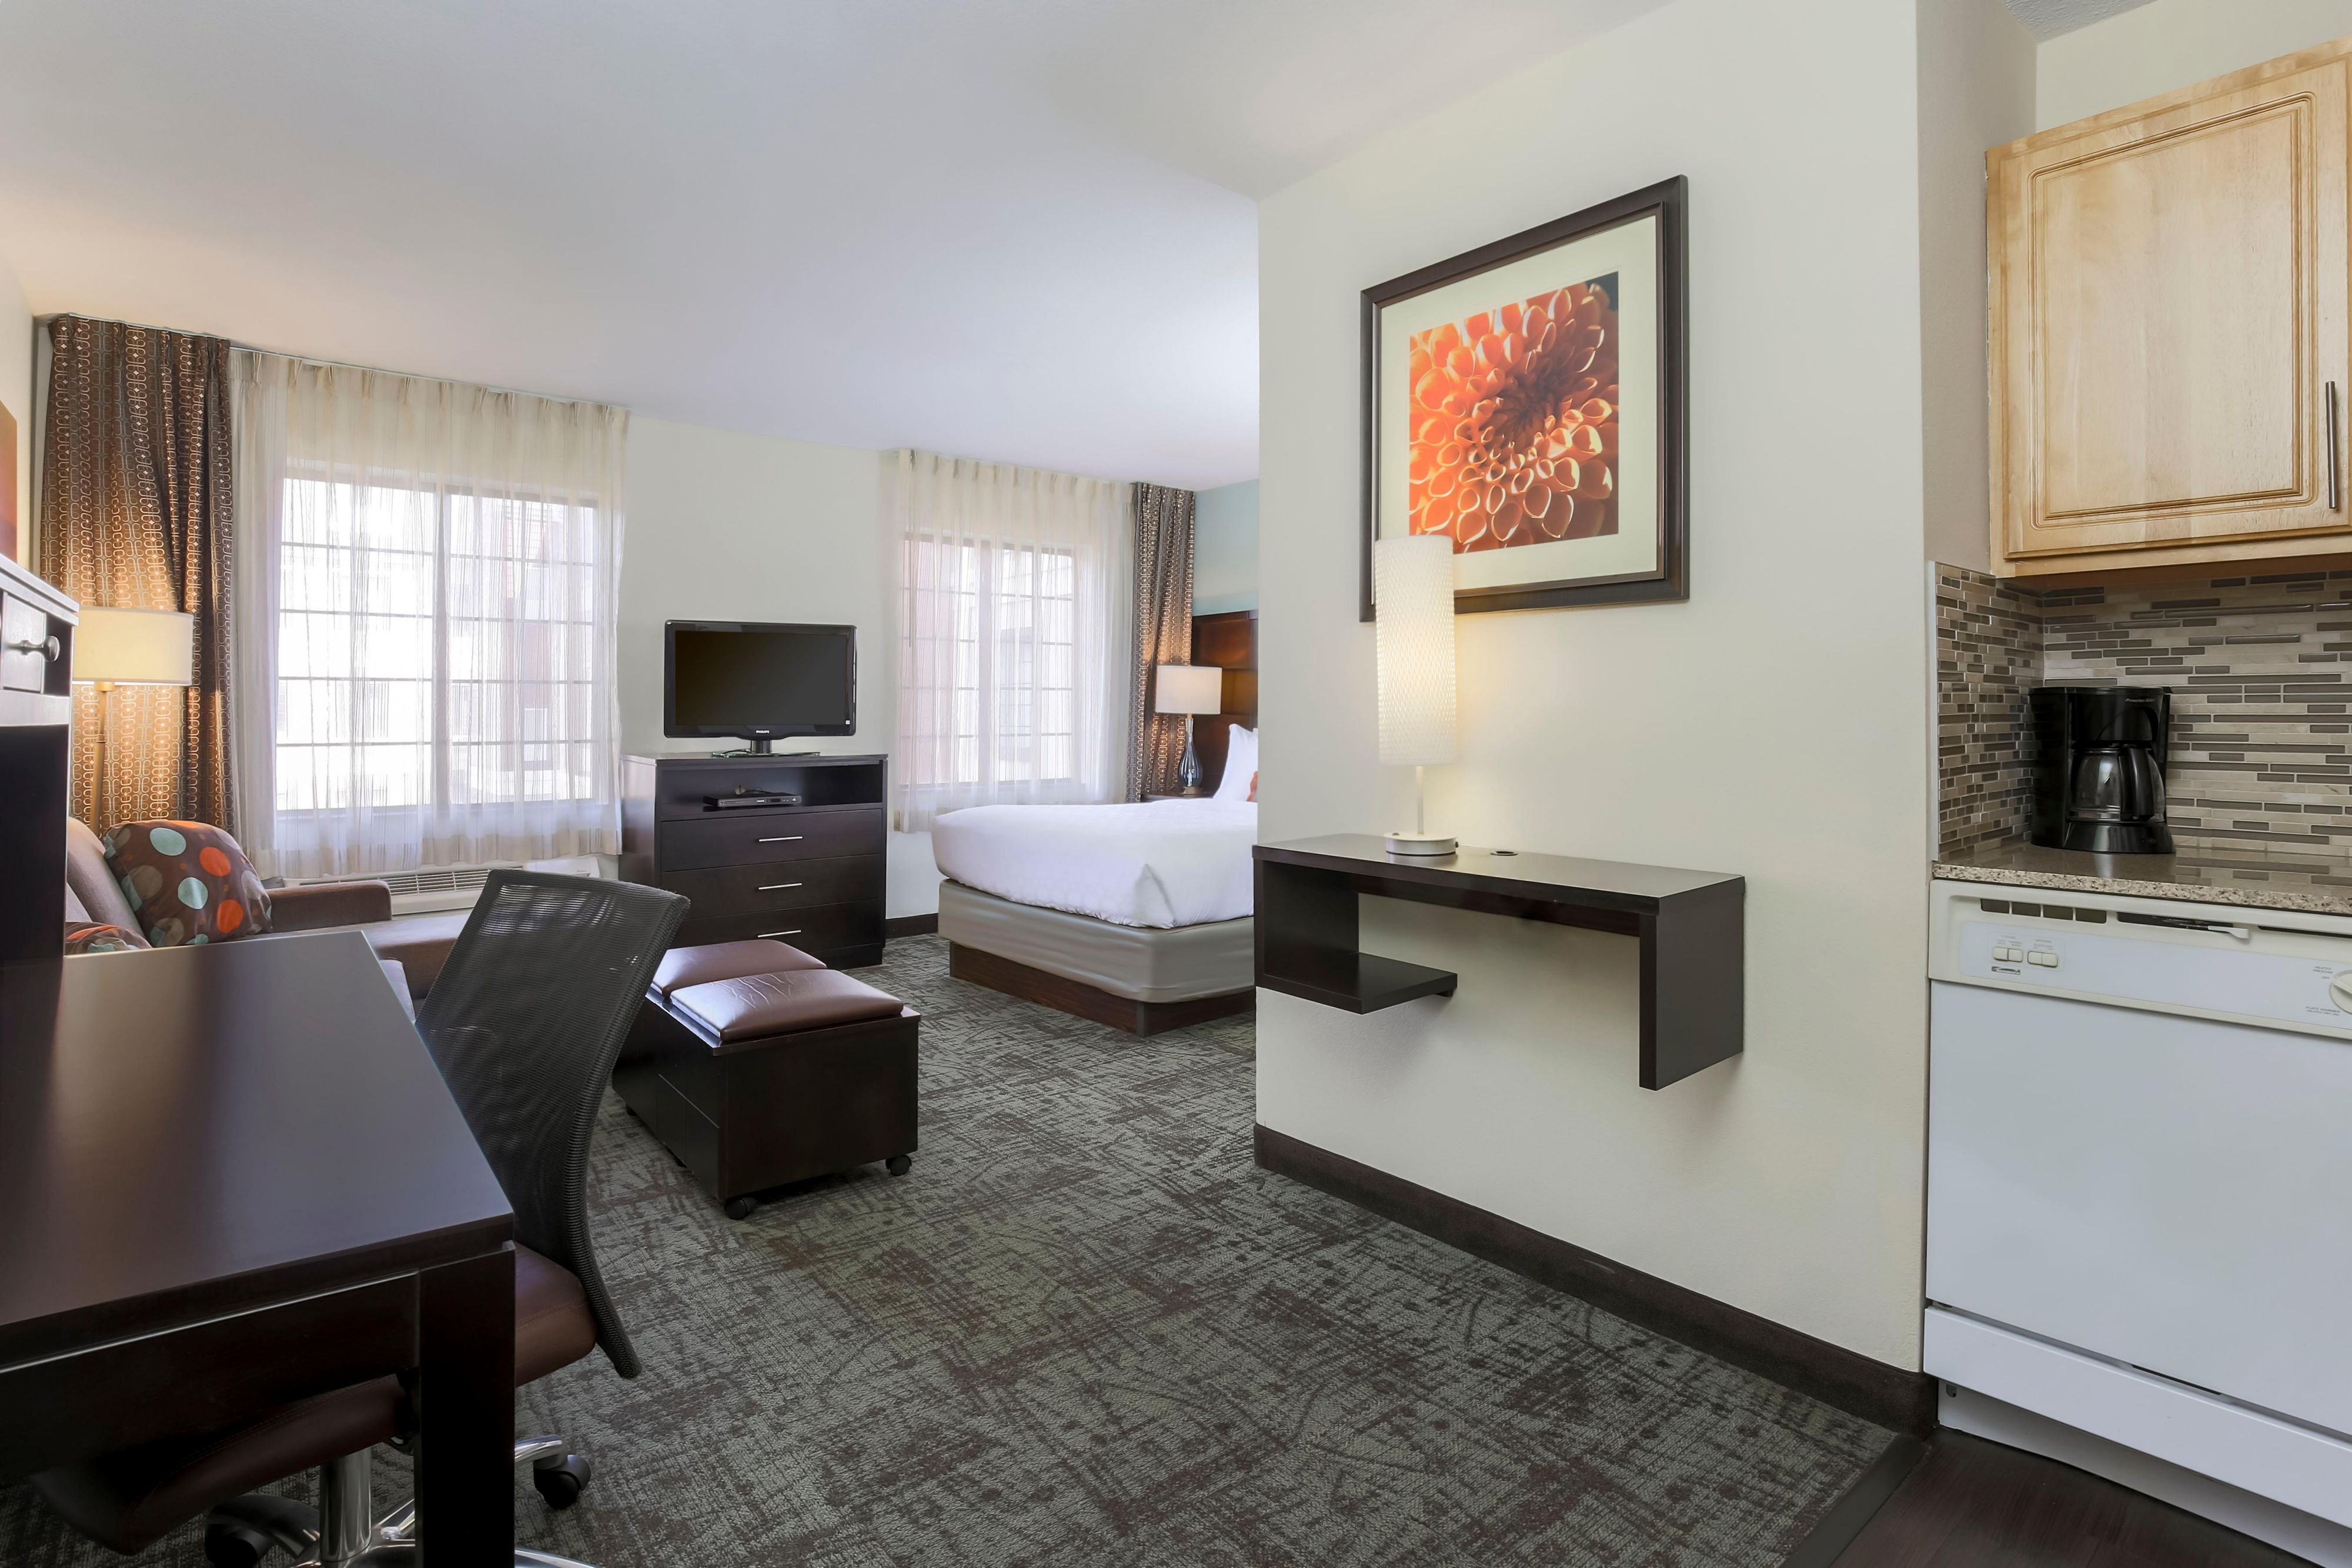 Our large suites feature a sitting area with pullout sofa, free Wi-Fi and a kitchen with stovetop, full size refrigerator, microwave and dishwasher. When you need to be away, let us be your home away from home. 